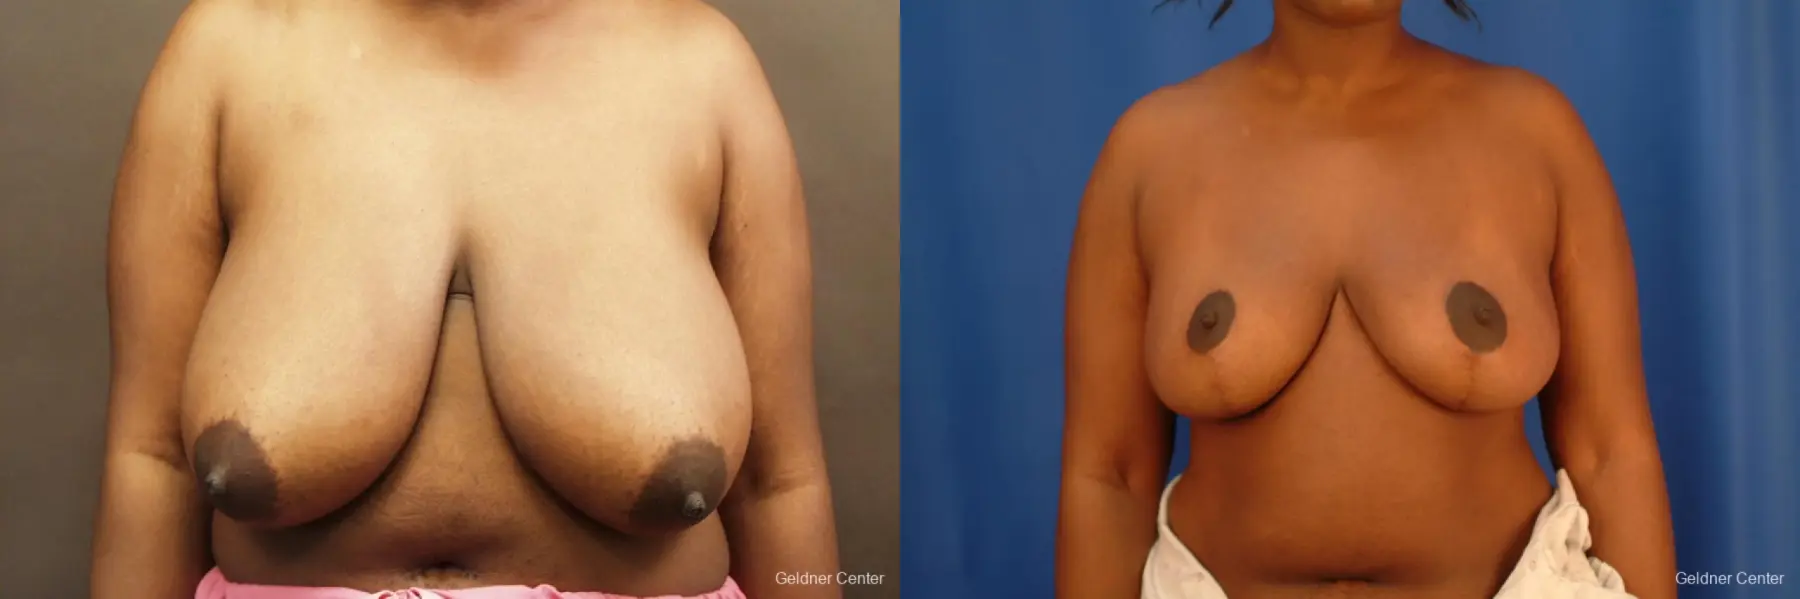 Chicago Breast Reduction 2441 - Before and After